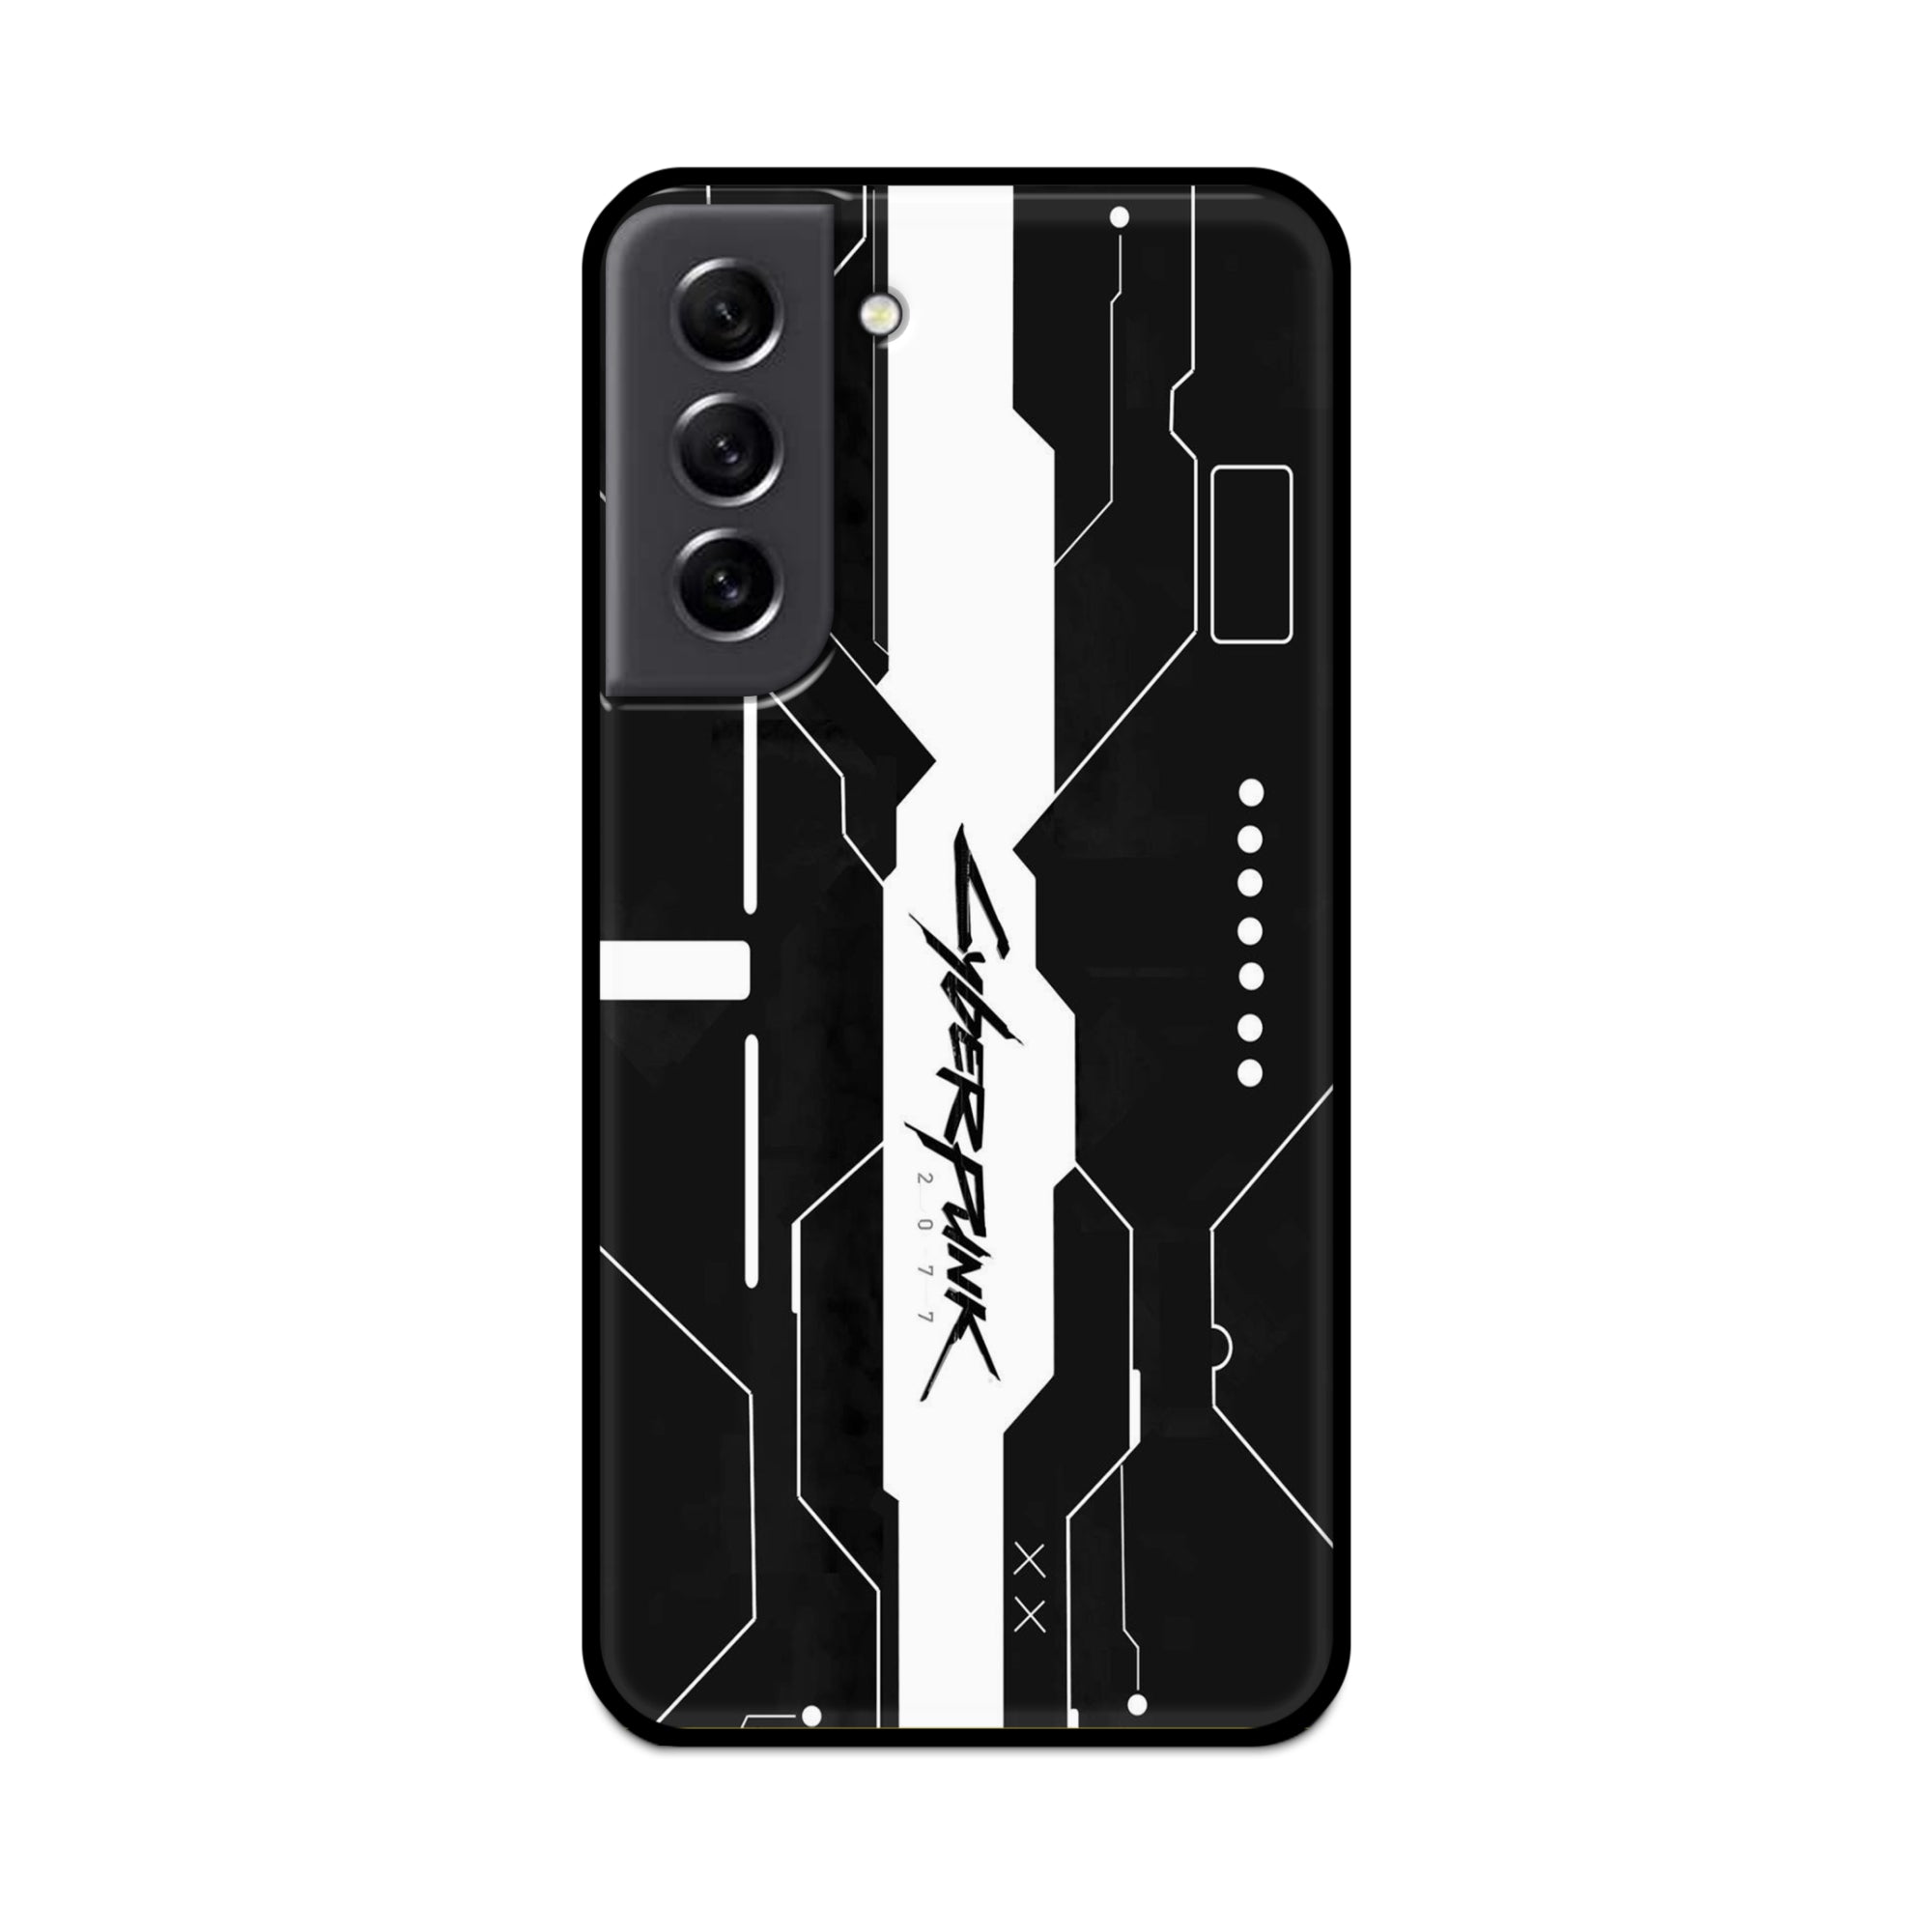 Buy Cyberpunk 2077 Art Metal-Silicon Back Mobile Phone Case/Cover For Samsung S21 FE Online